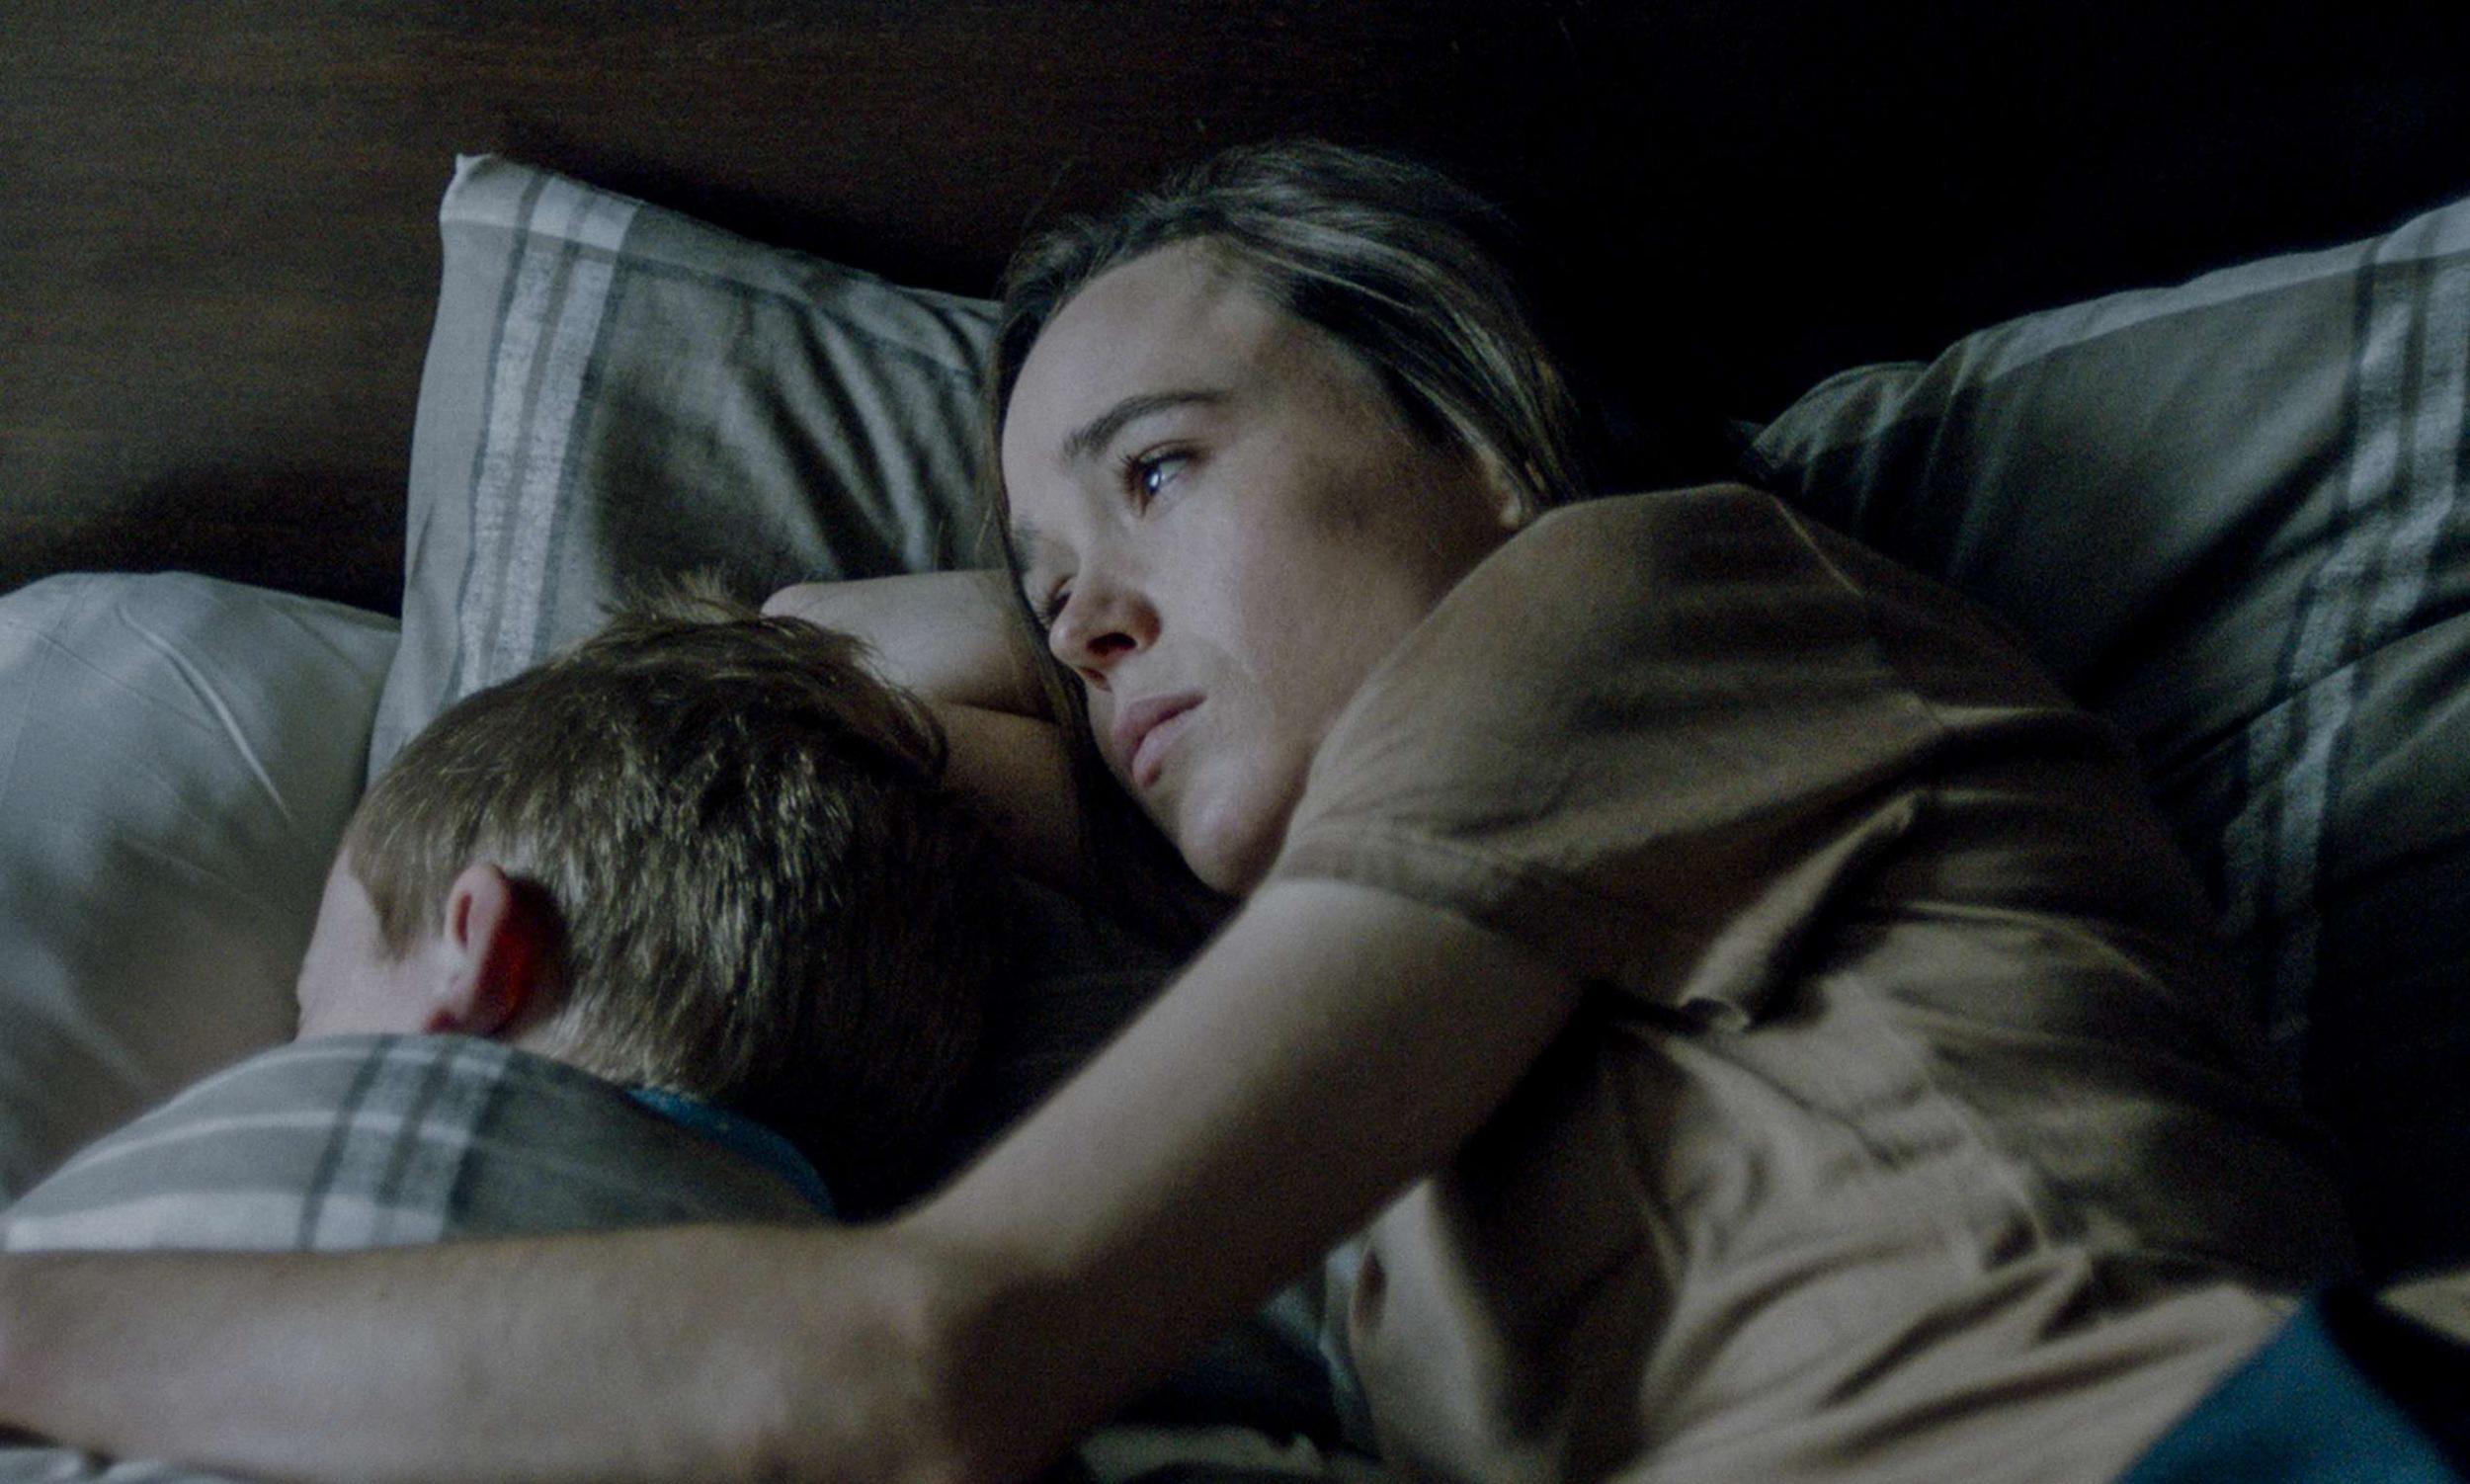 In ‘The Cured’ Ellen Page plays a woman who allows her brother-in-law – a former zombie – to stay in her home